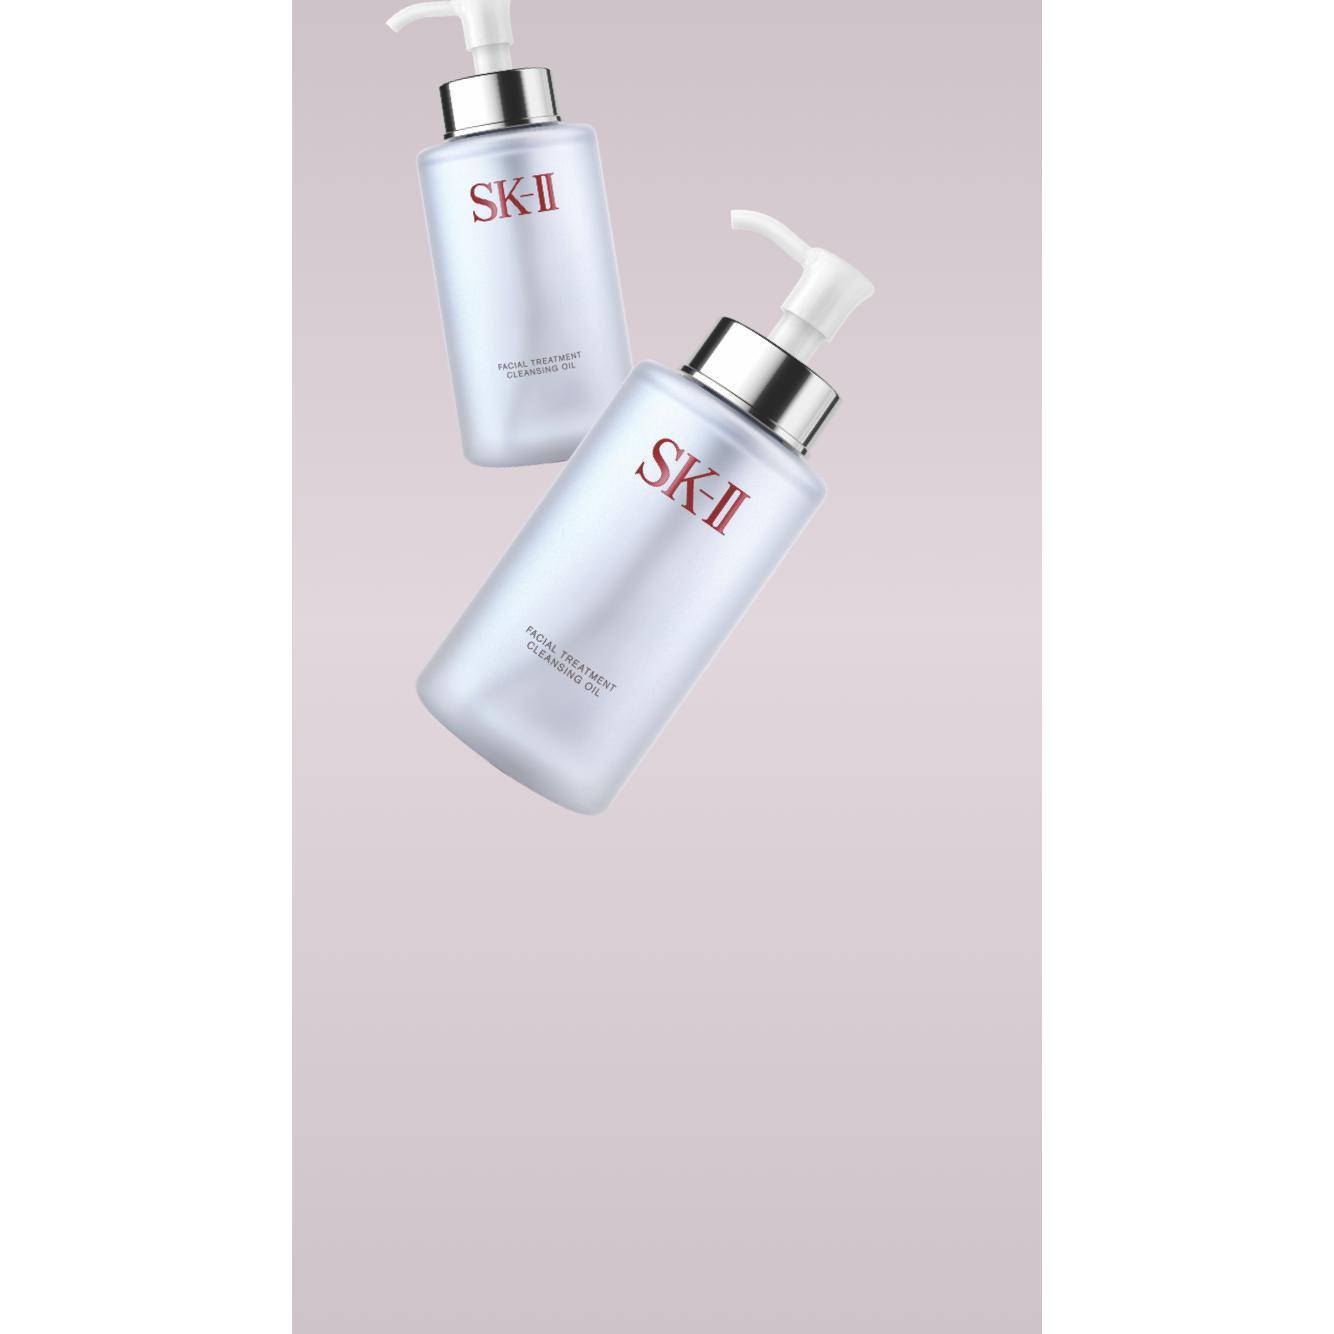 SK-II Facial Treatment Cleansing Oil Pitera Essence Makeup Cleanser 250ml